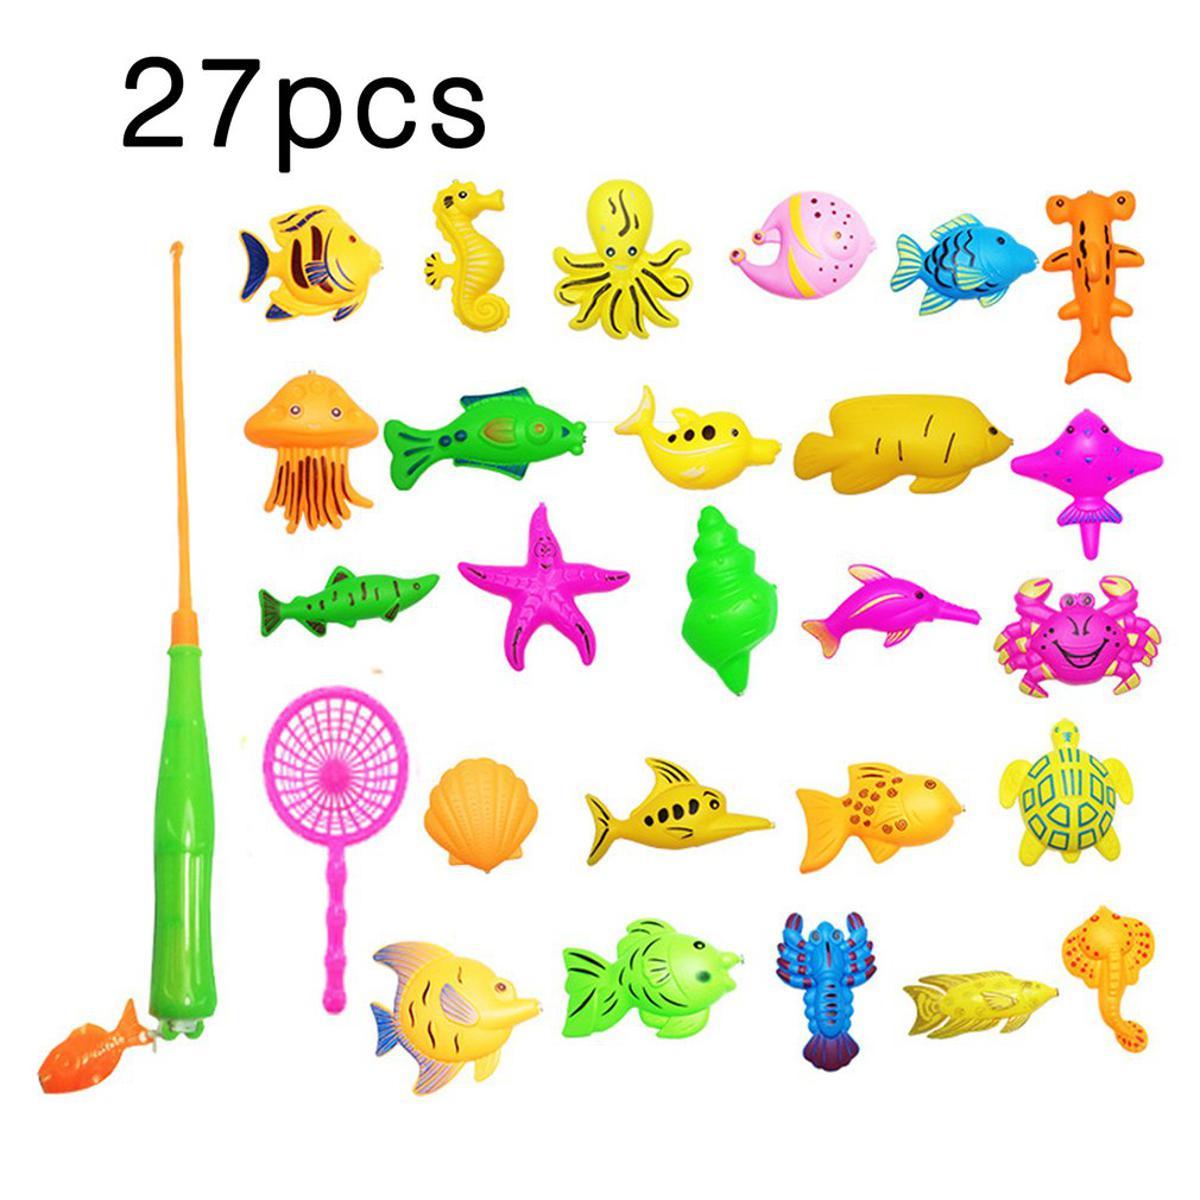 39/15/27 Pieces Magnetic Fishing Toy Fishing Learning Education Play Set